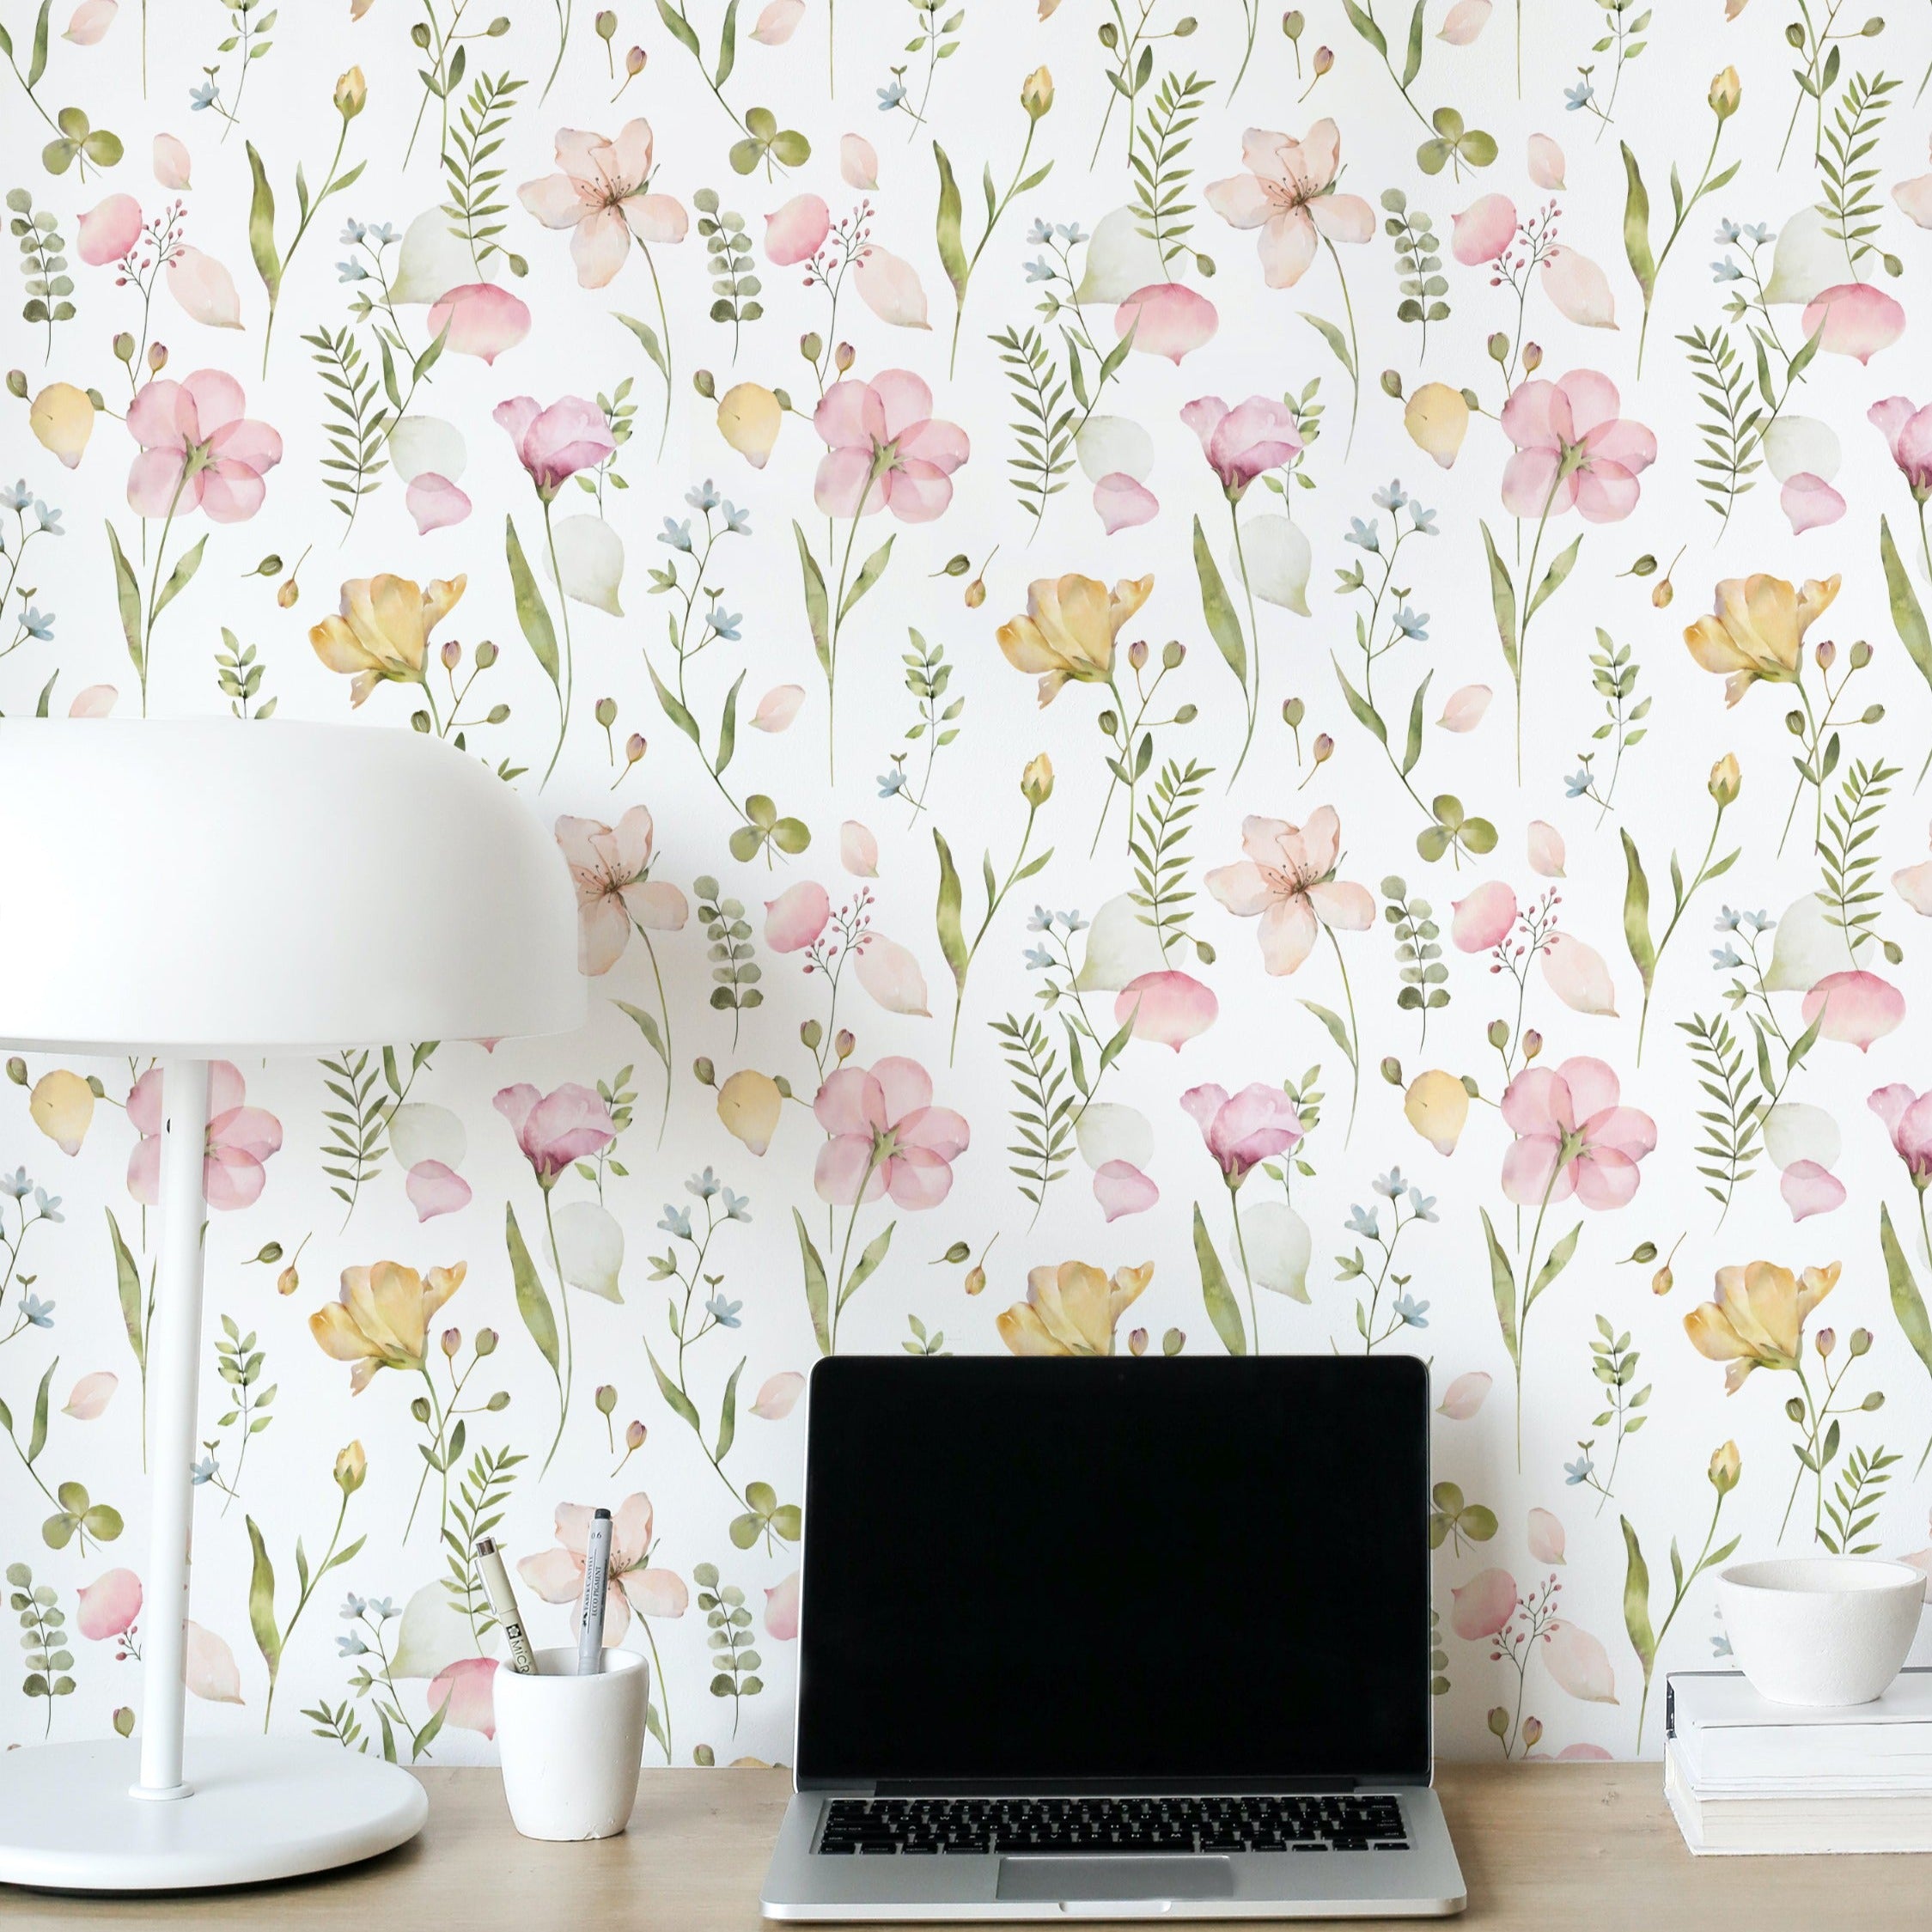 A home office setting decorated with the Serene Floral Wallpaper, providing a vibrant backdrop of soft pink and yellow flowers and green leaves. The desk area is neatly arranged with a laptop, white lamp, and office supplies, creating a peaceful and inspiring work environment.